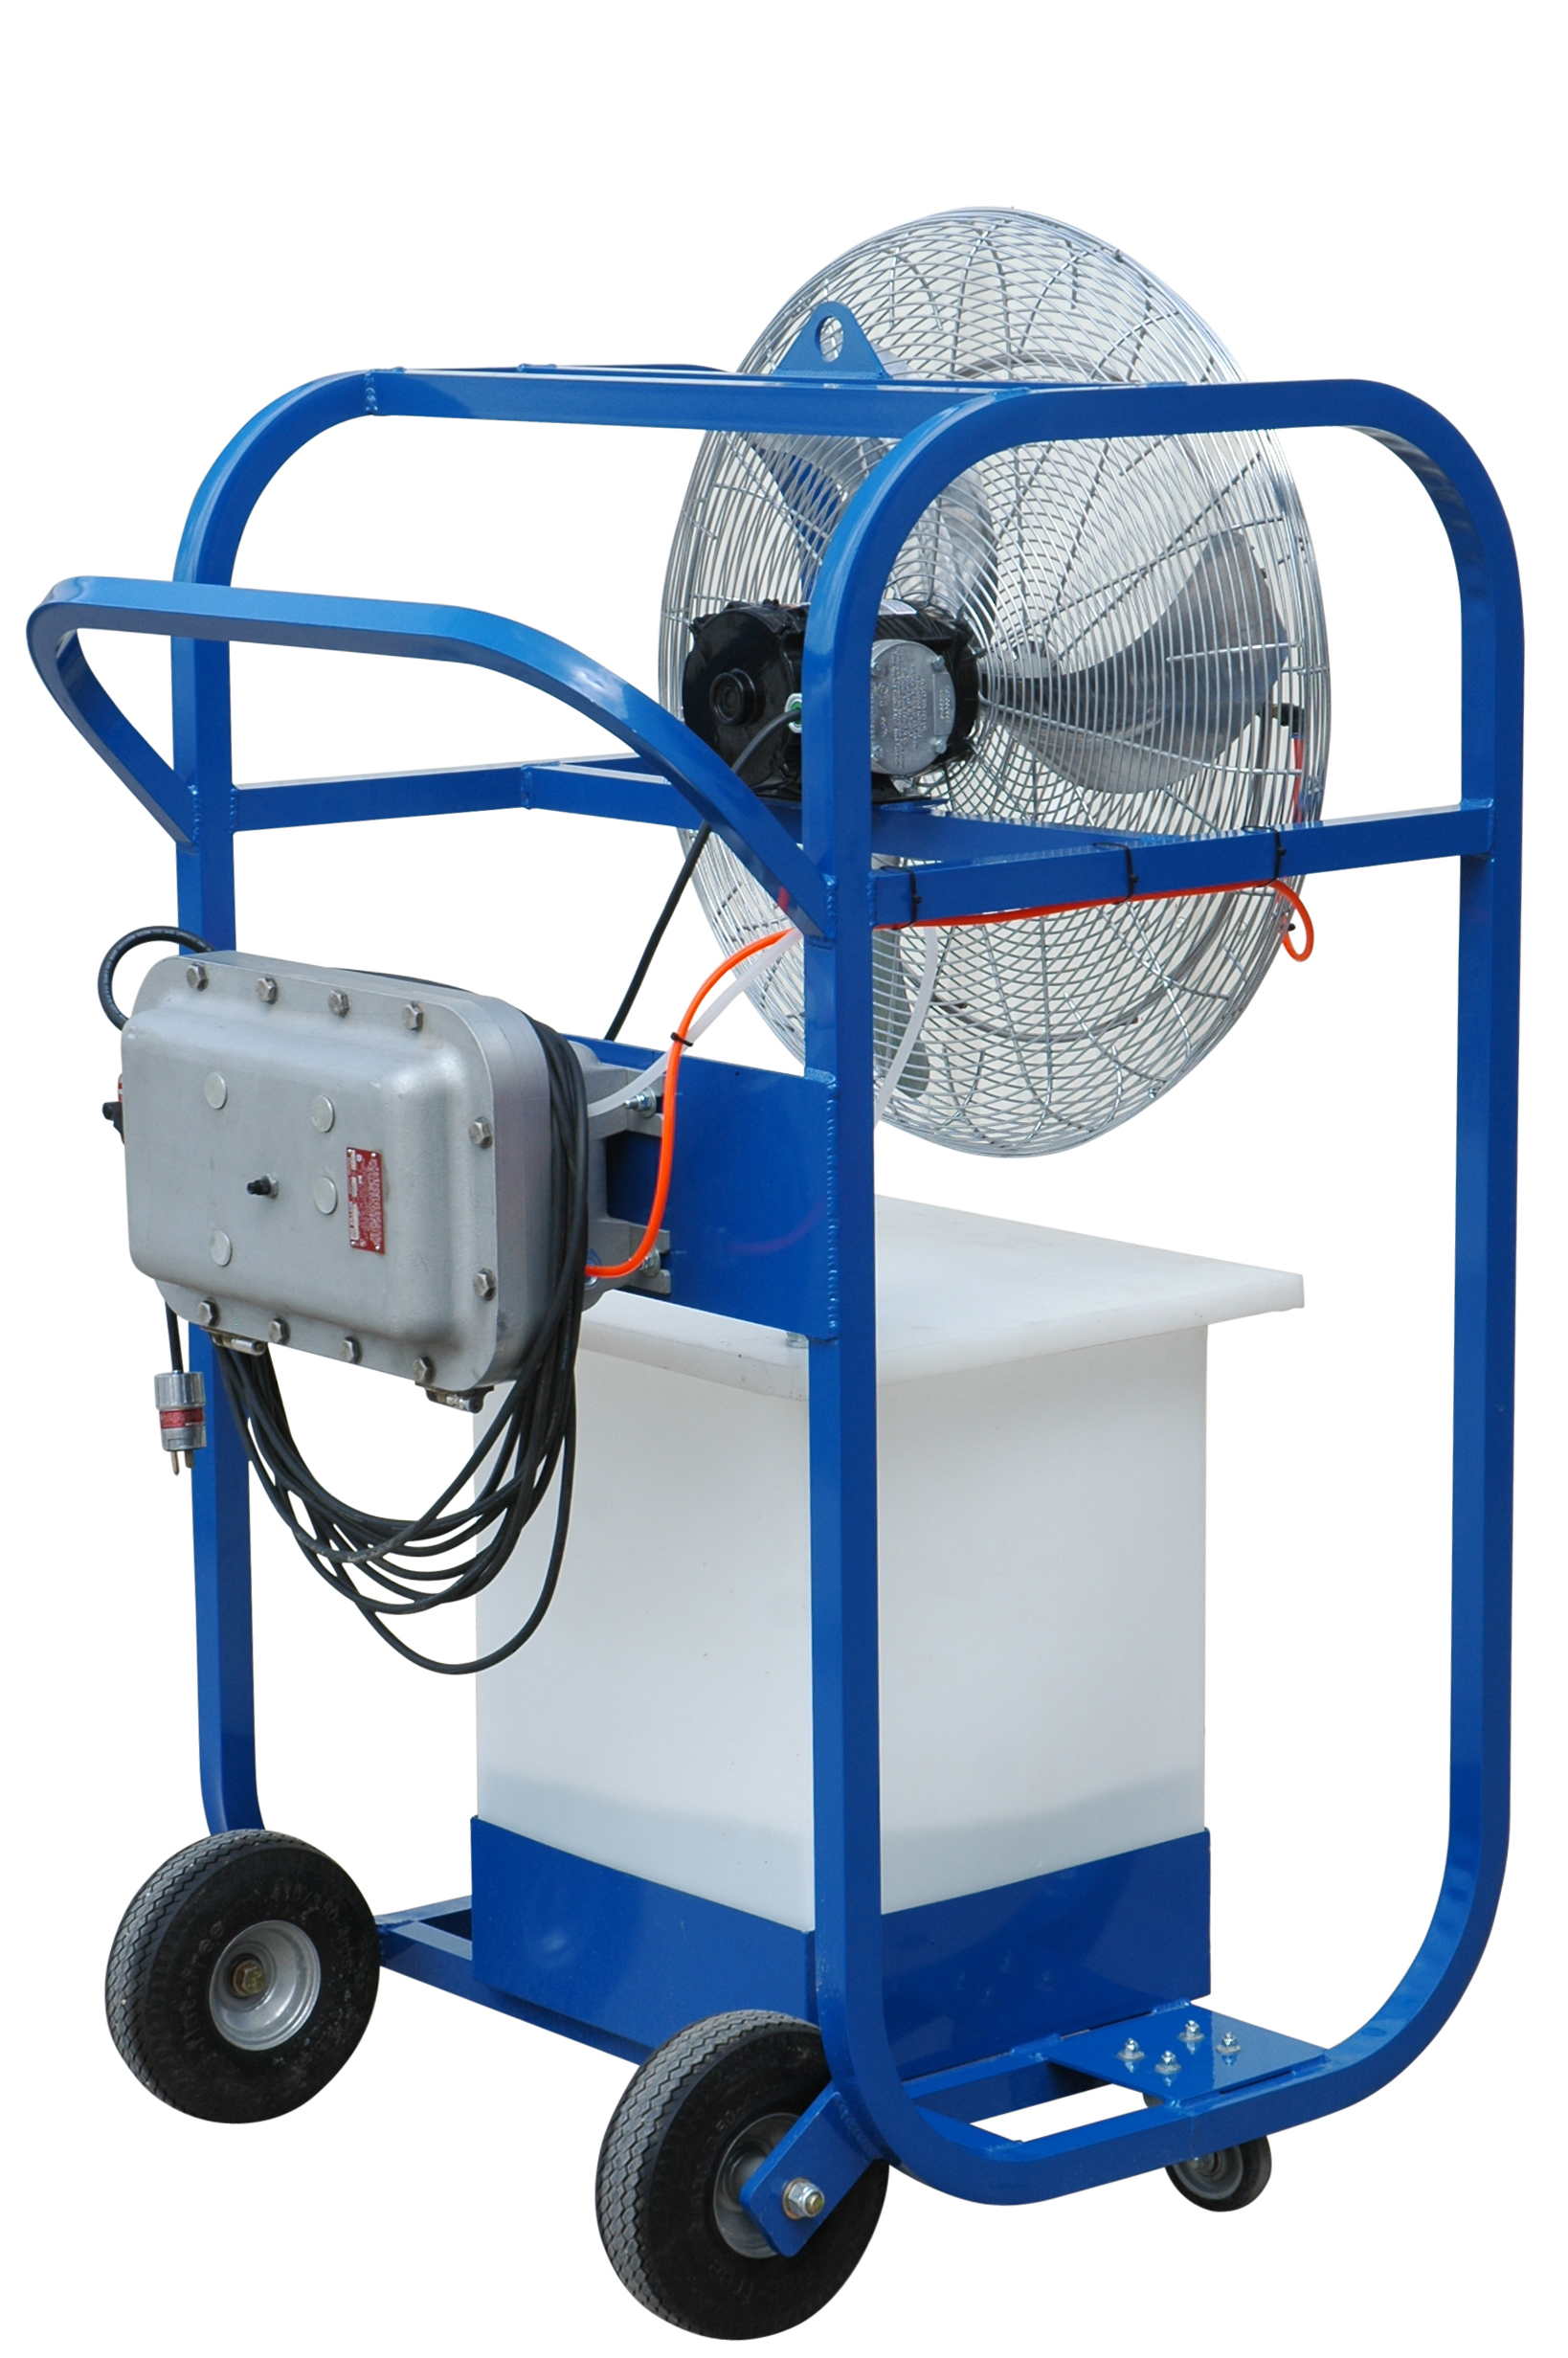 Class 1 Division 1 Portable Air Chiller Mounted on Cart with 6" Wheels